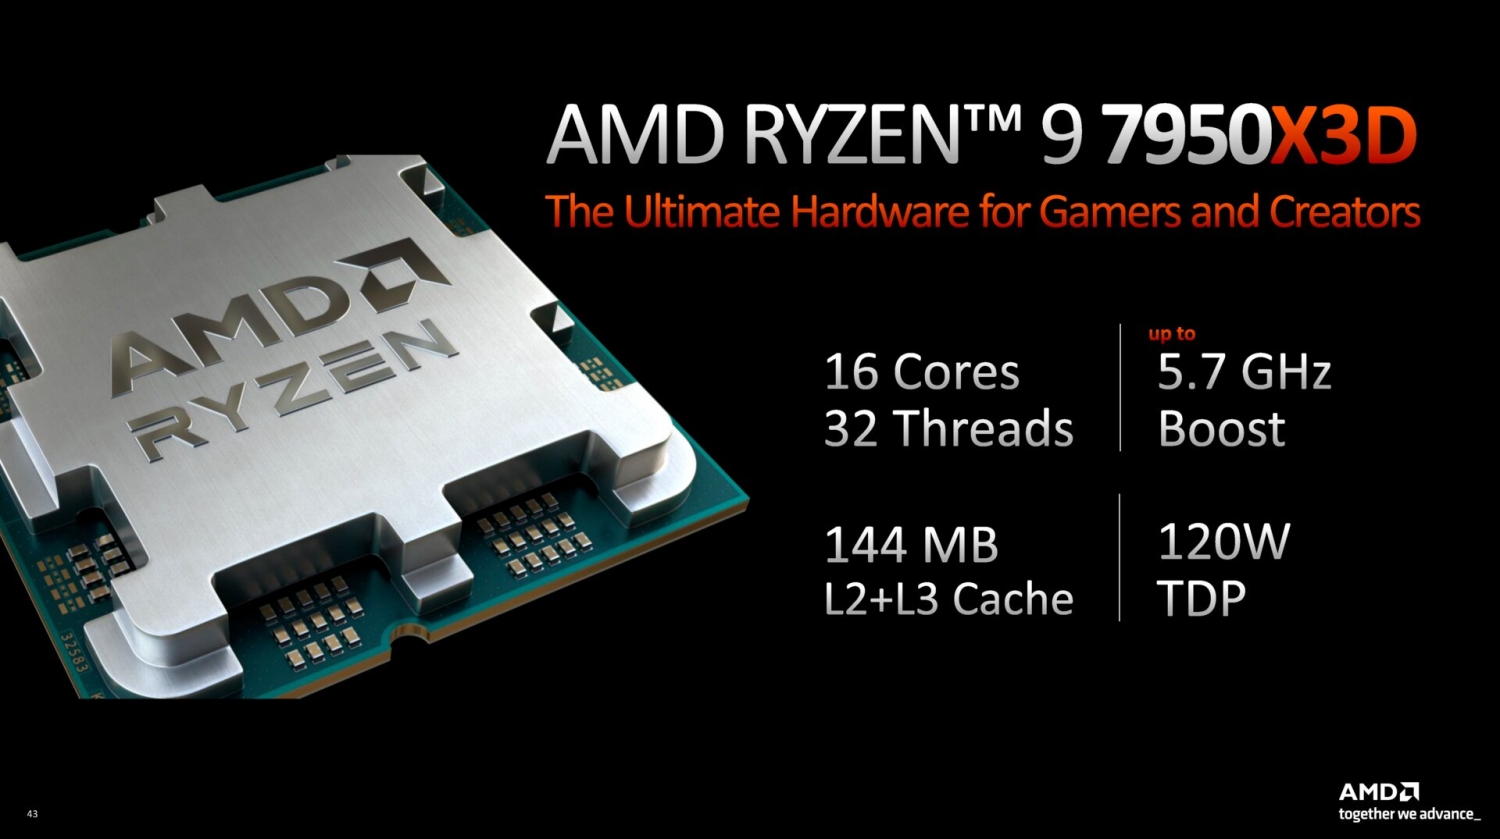 AMD Ryzen 9 7950X3D is real: 144MB of cache, up to 5.7GHz, drops 